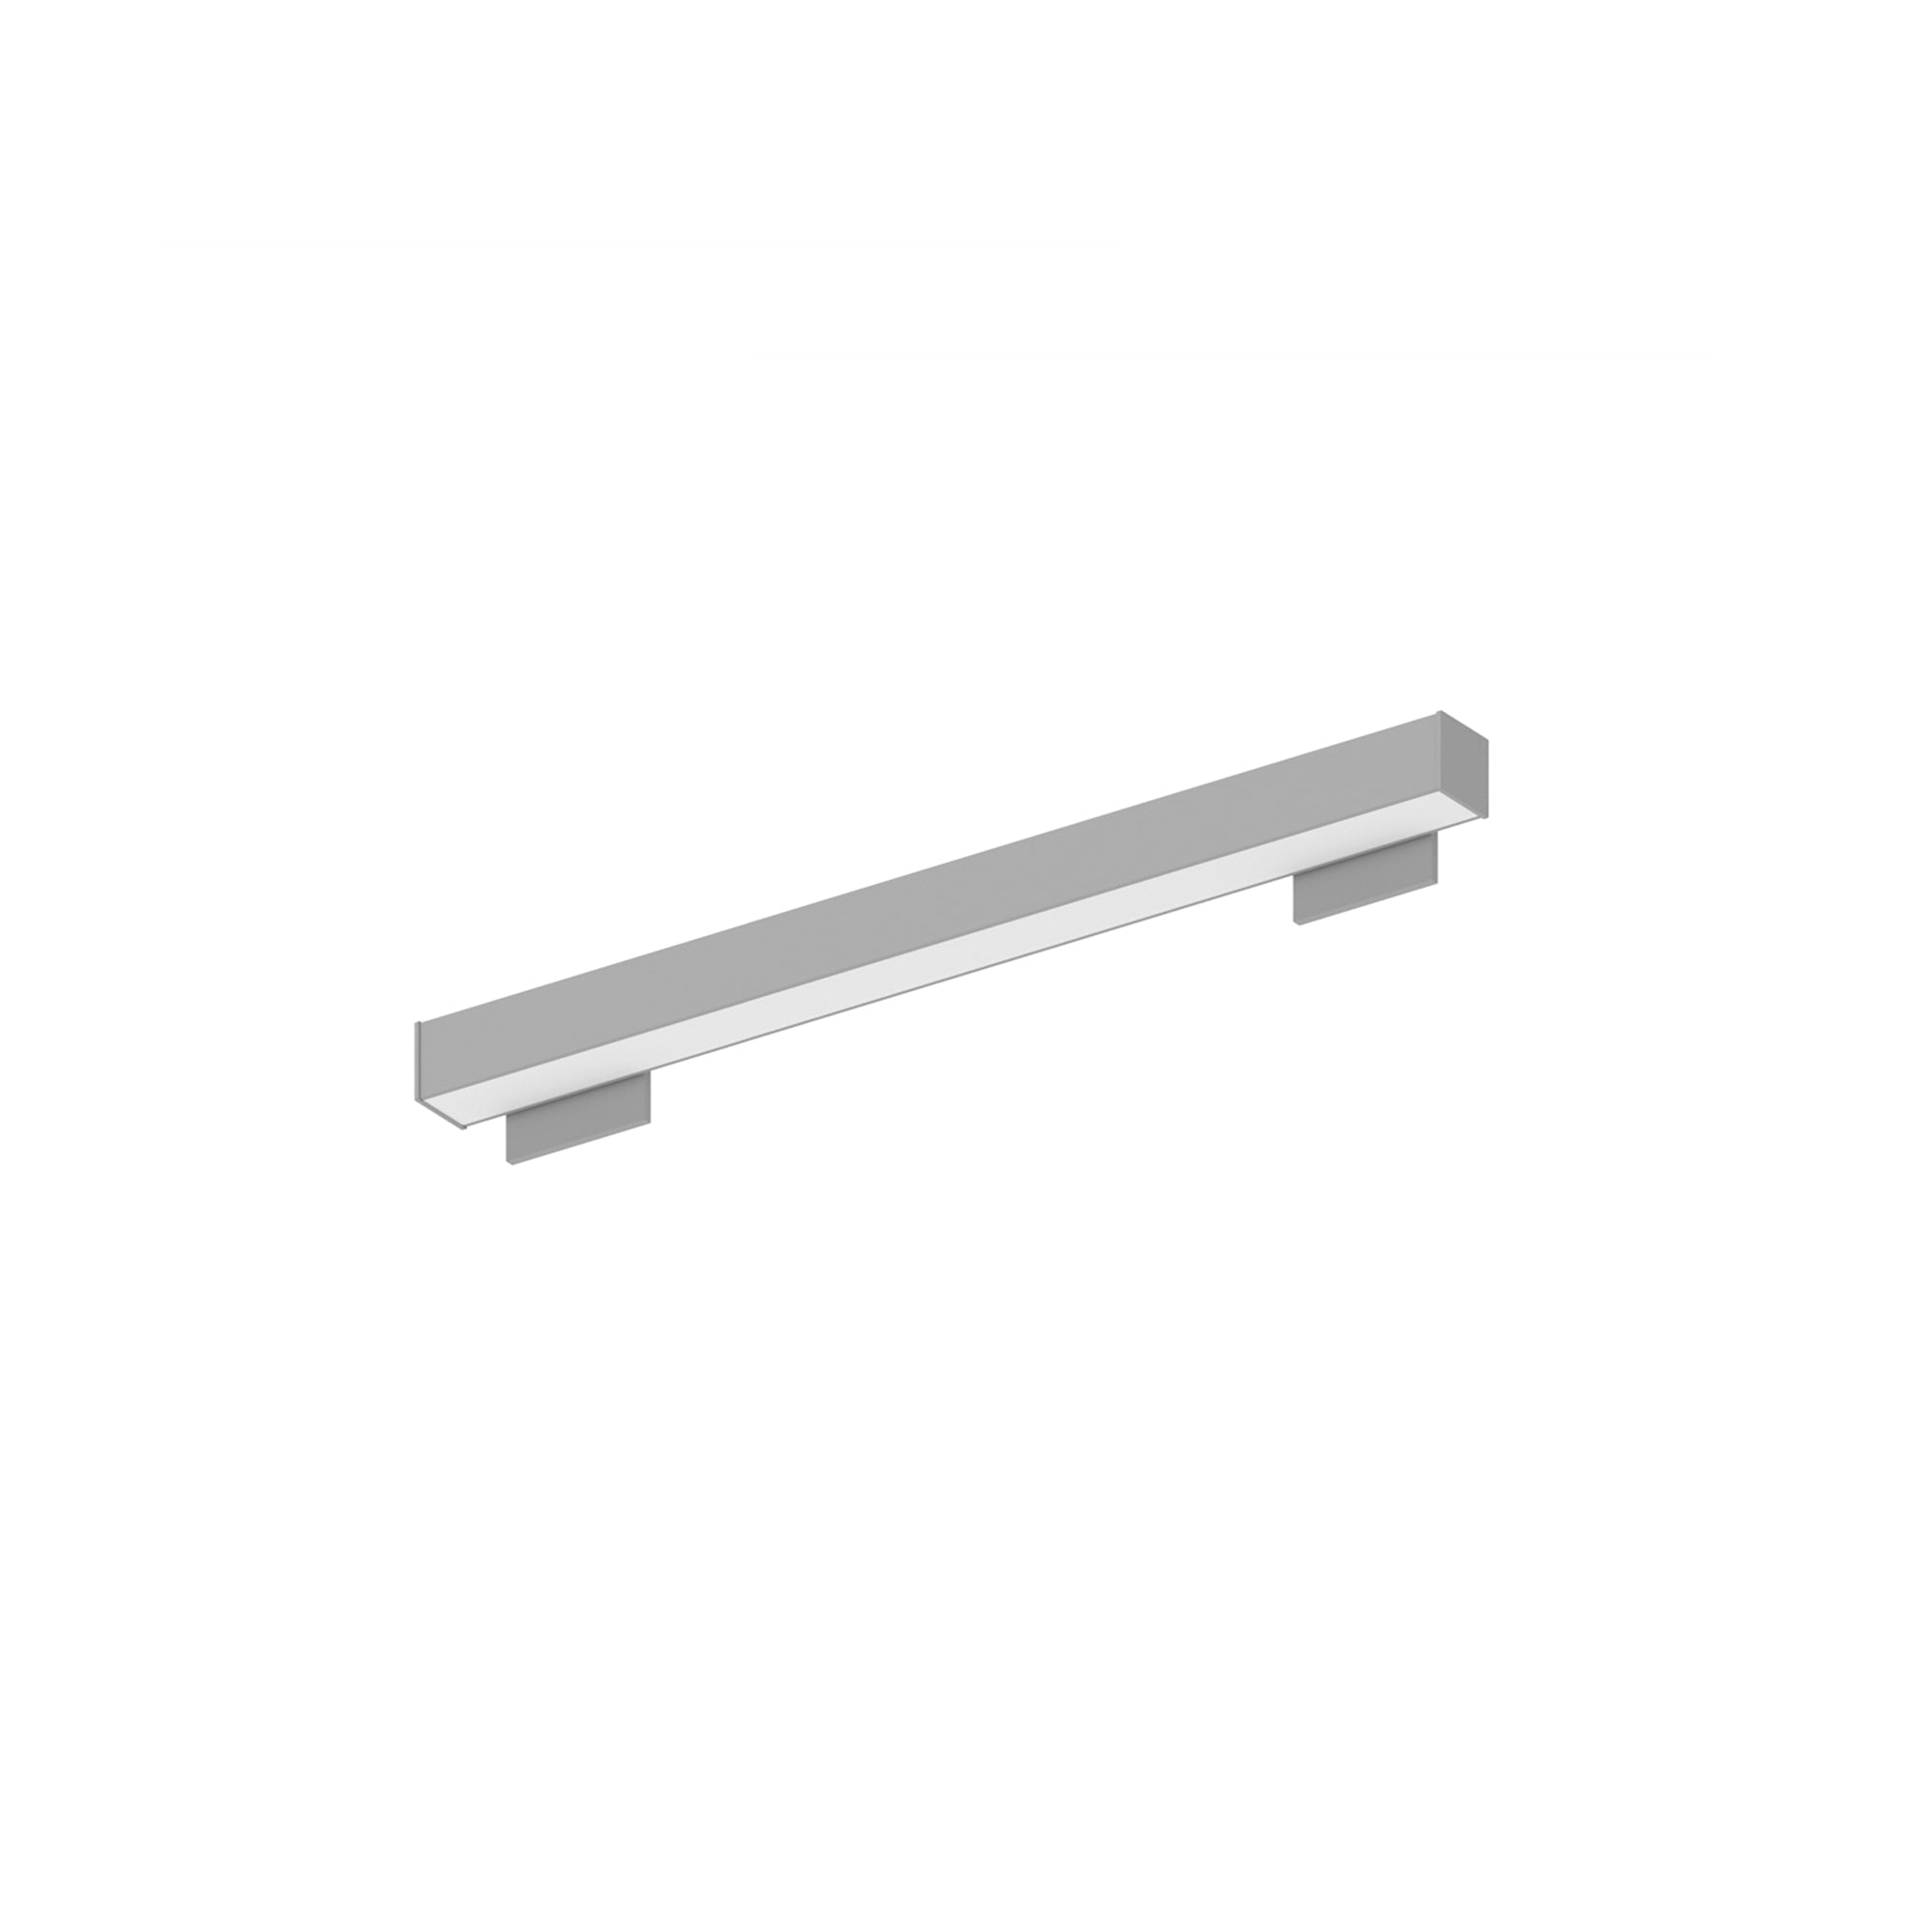 Nora Lighting NWLIN-21035A/L4P-R4 - Linear - 2' L-Line LED Wall Mount Linear, 2100lm / 3500K, 4 Inchx4 Inch Left Plate & 4 Inchx4 Inch Right Plate, Left Power Feed, Aluminum Finish